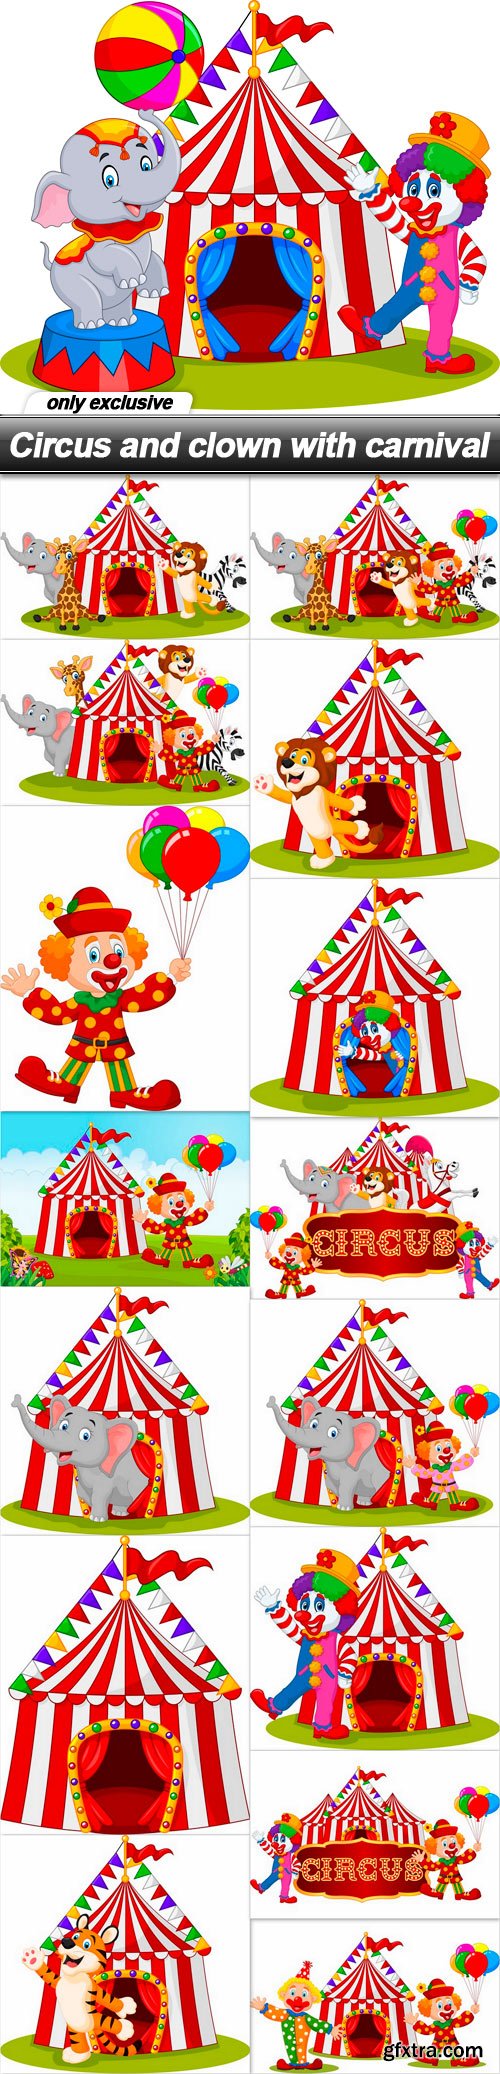 Circus and clown with carnival - 16 EPS